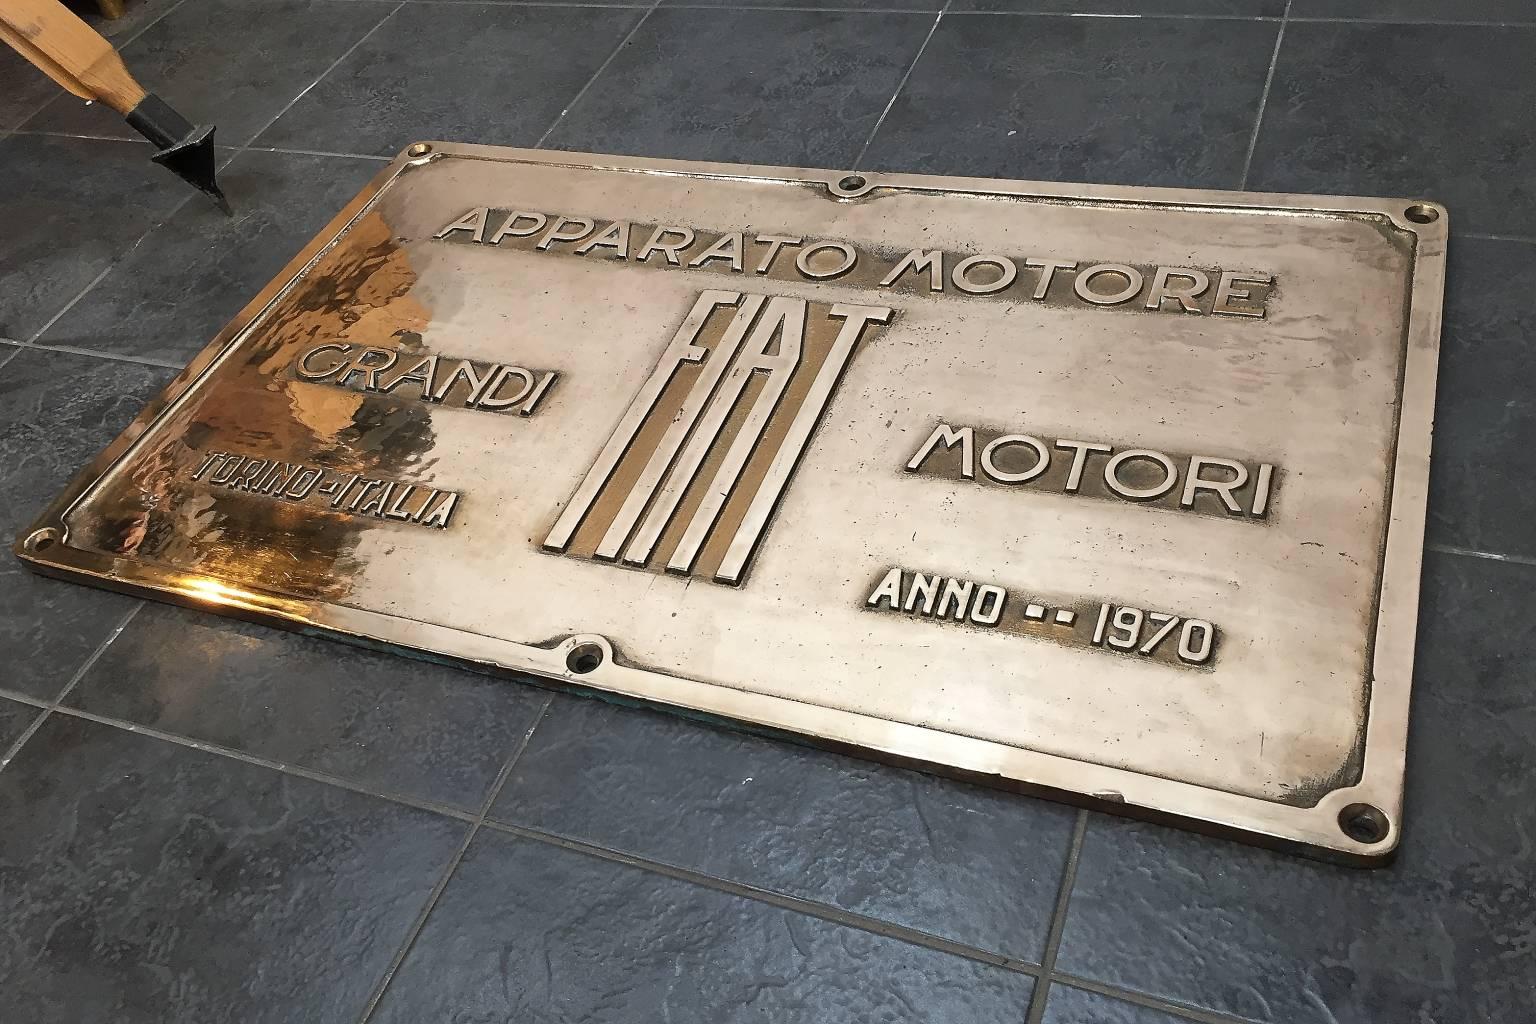 A solid brass engine builders plate.

'Grandi Motori' is the diesel wing of the car manufacturer Fiat.

This was reclaimed from a set of engines used by MV Doulos, the oldest passenger liner in the world!

The 101-year old ship was originally